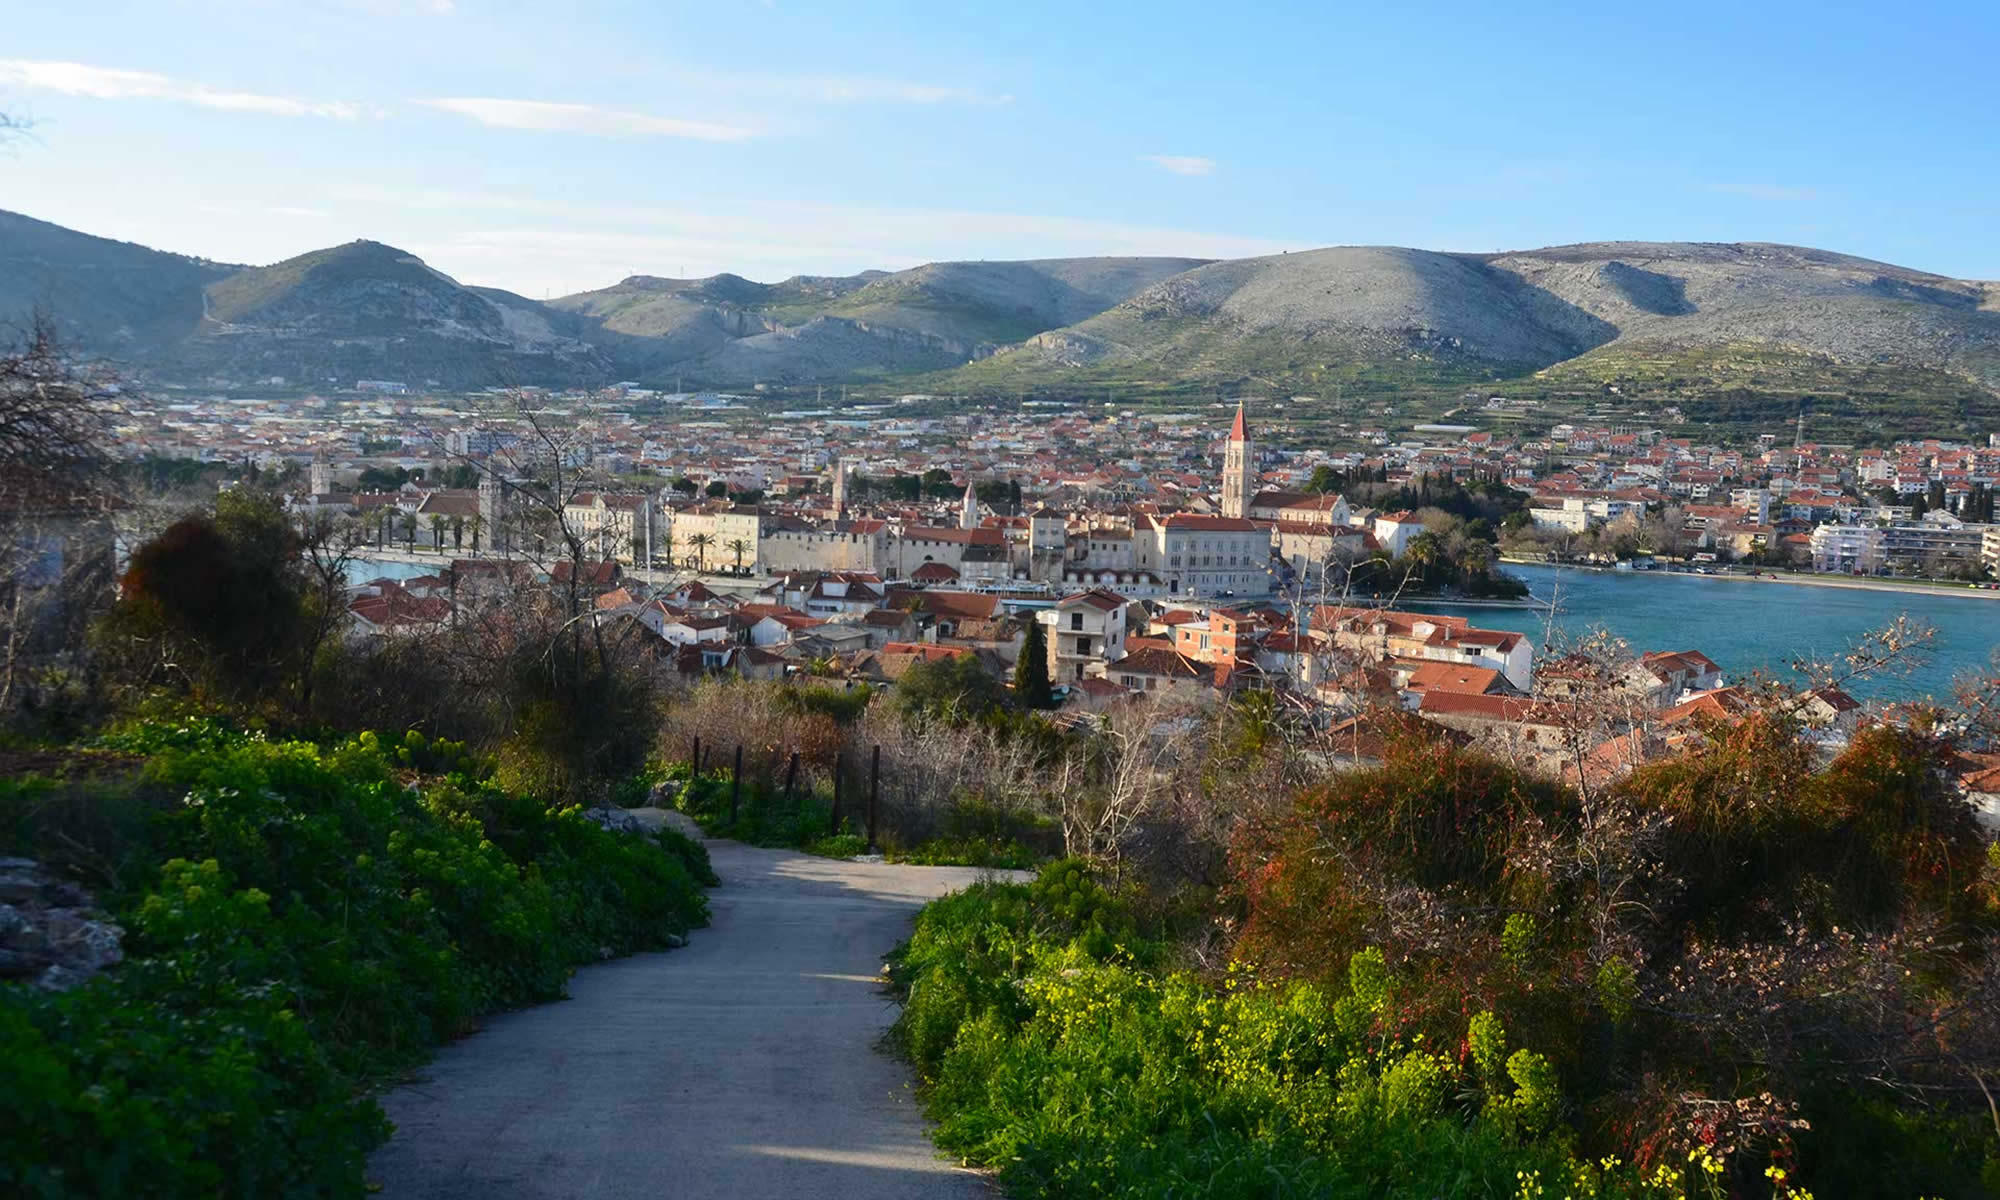 The city of Trogir, Croatia is seen from afar, via a walking path that is surrounded by greenery. You can see mountains in the distance, as well as the Adriatic Sea.